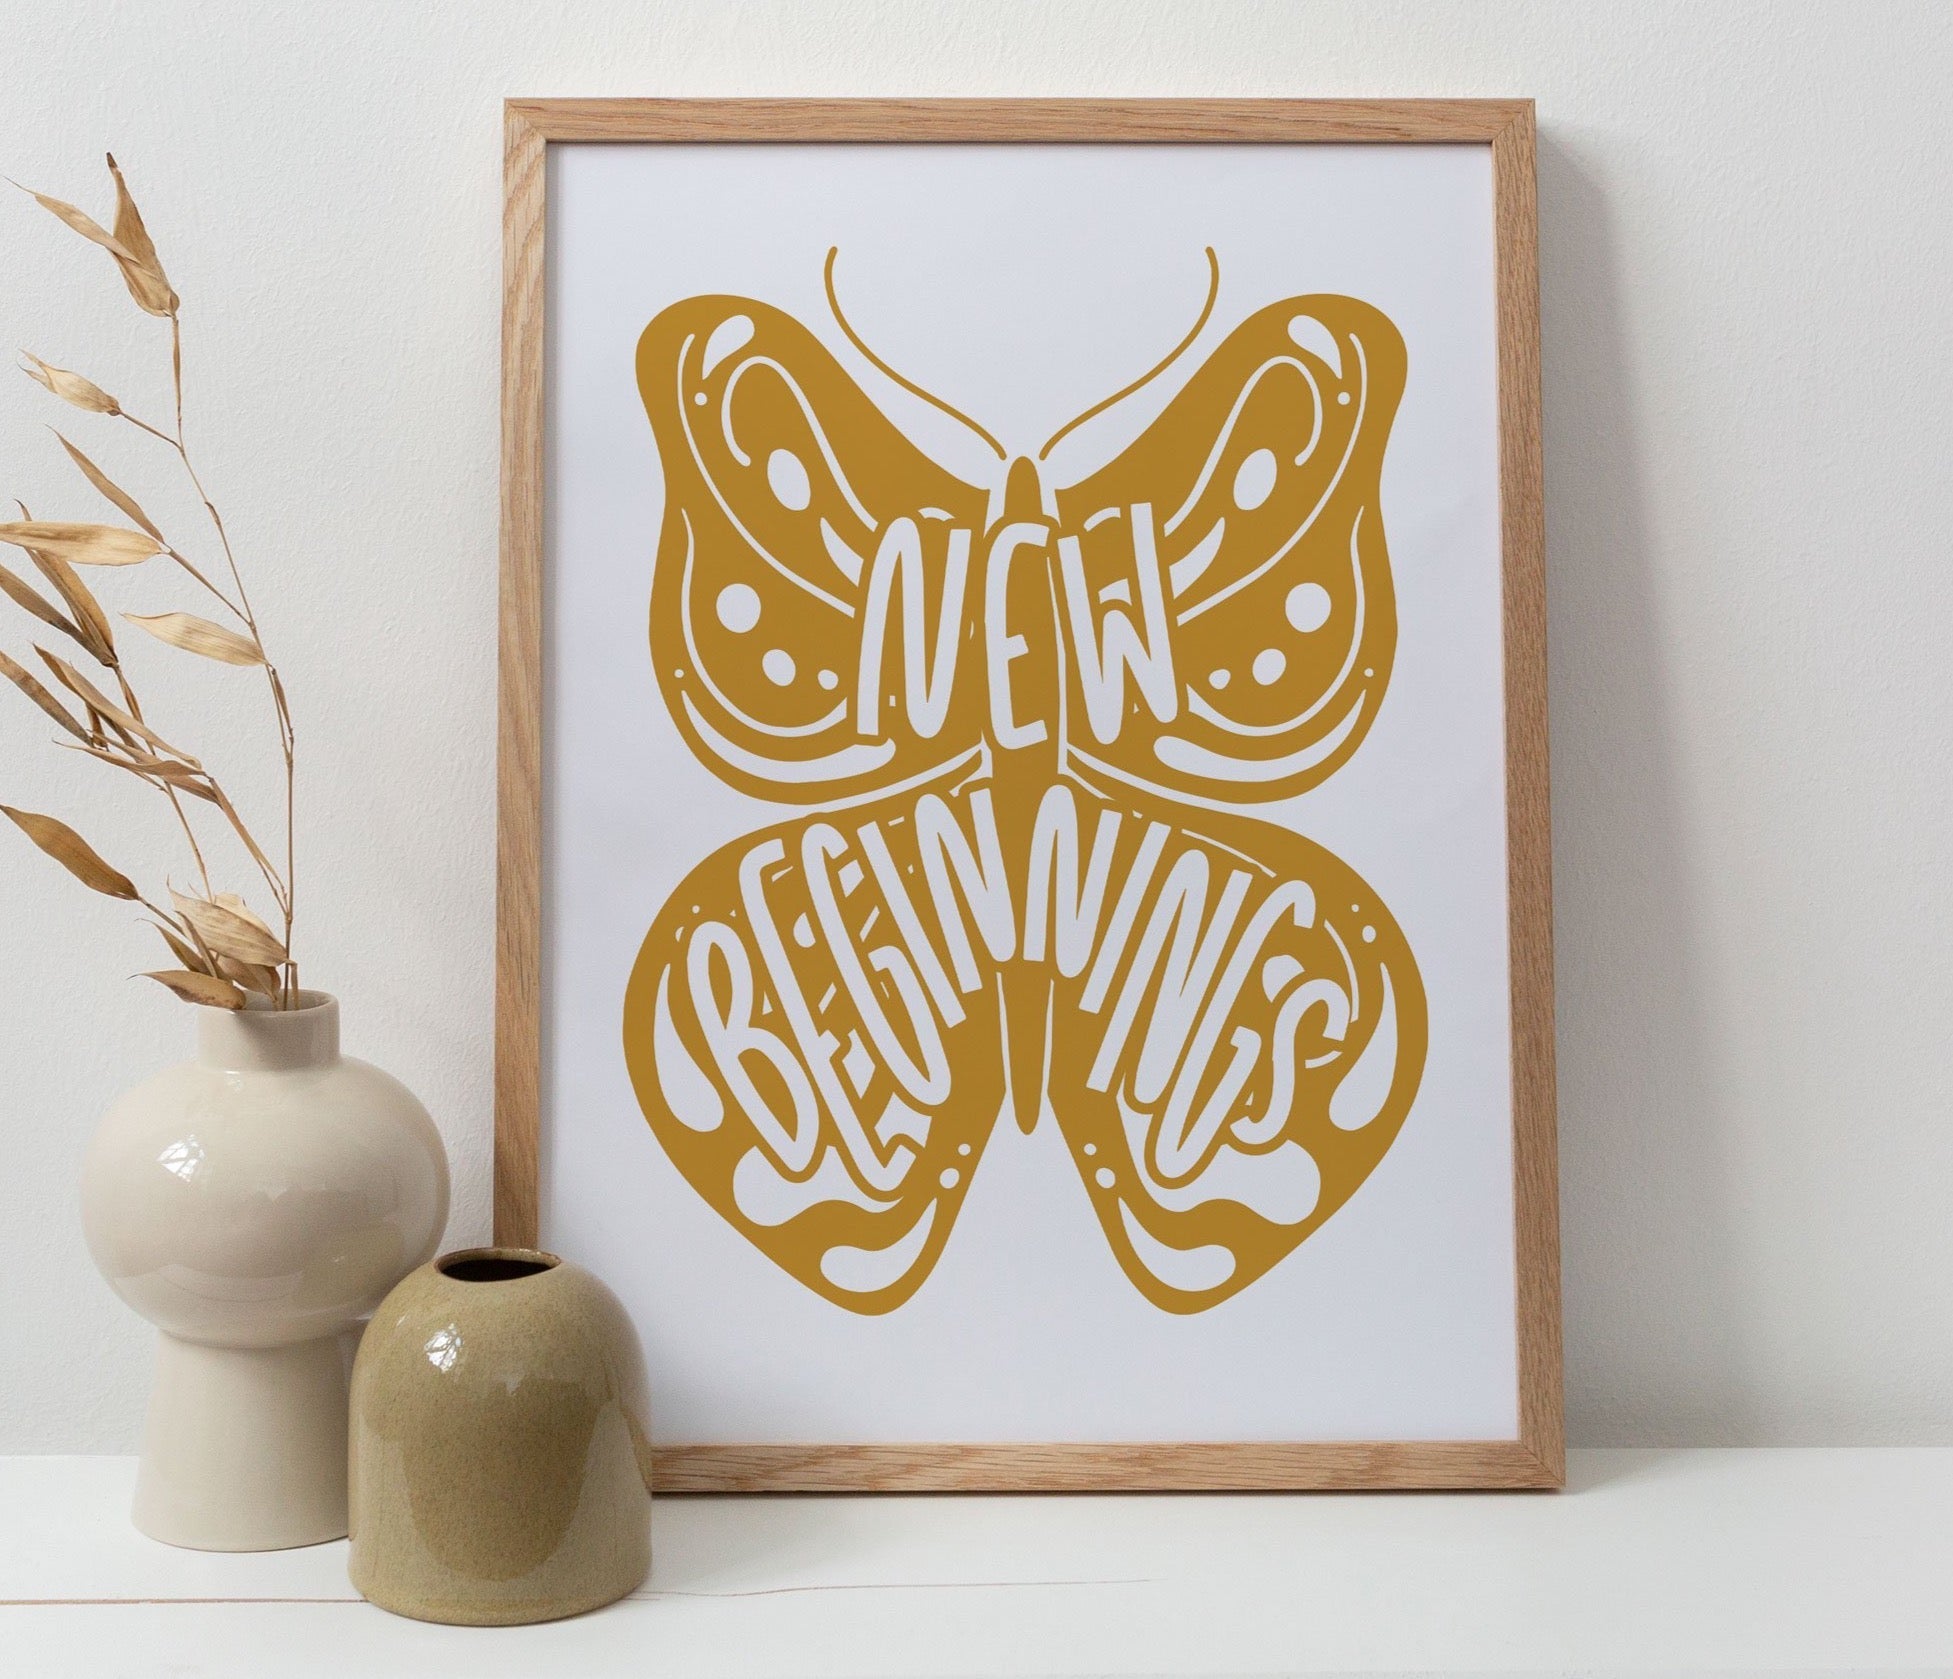 Copy of New Beginnings Butterfly Print - Gold